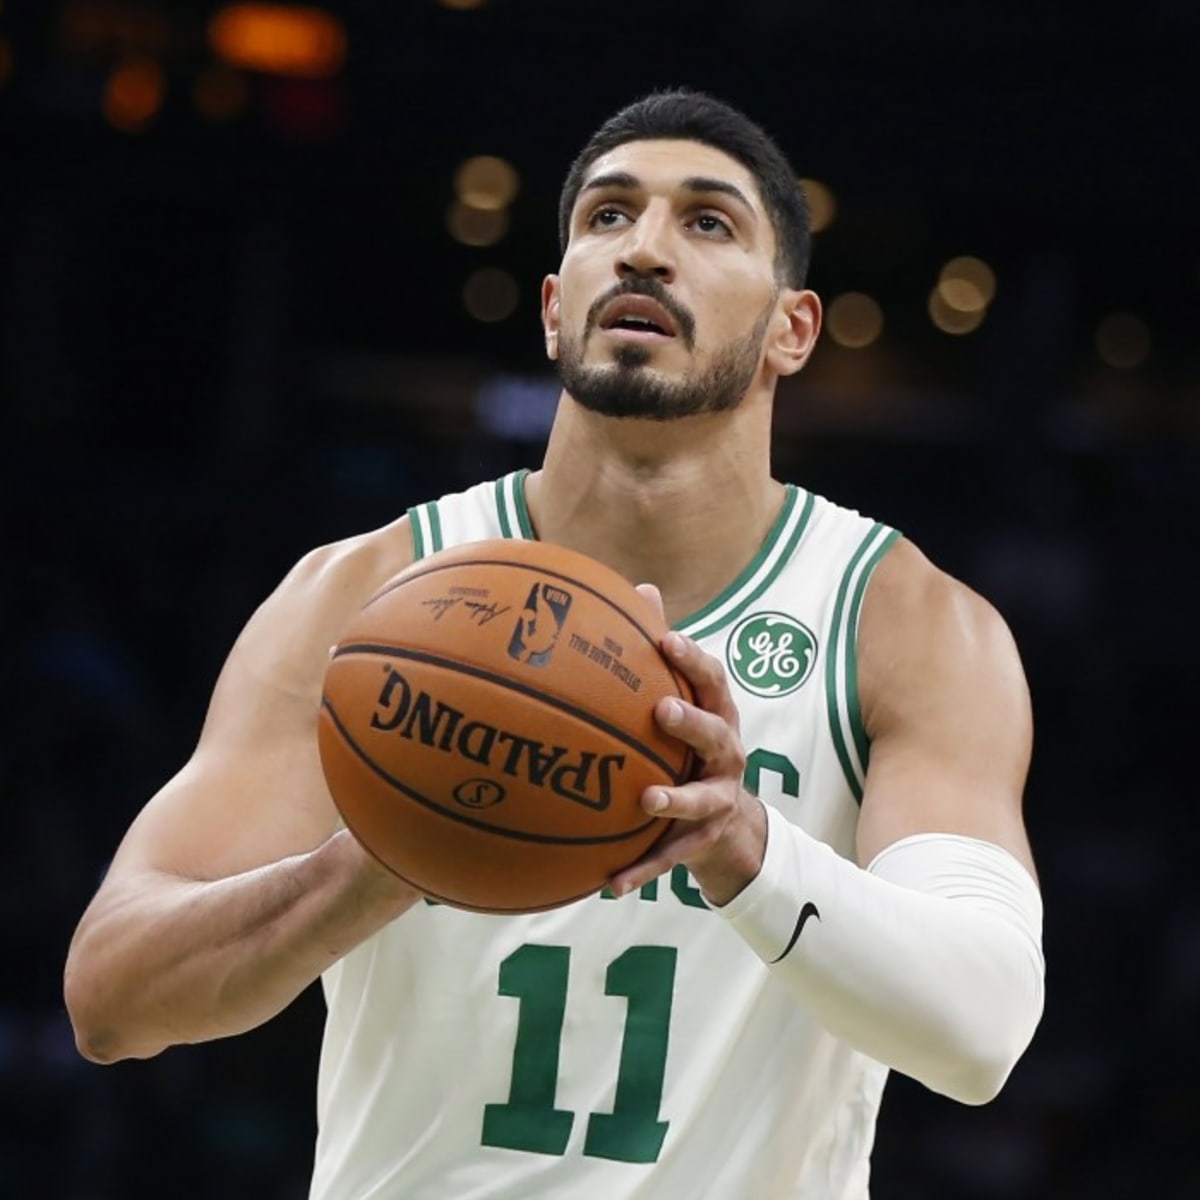 The Portland Trail Blazers are running it back by trading for Enes Kanter